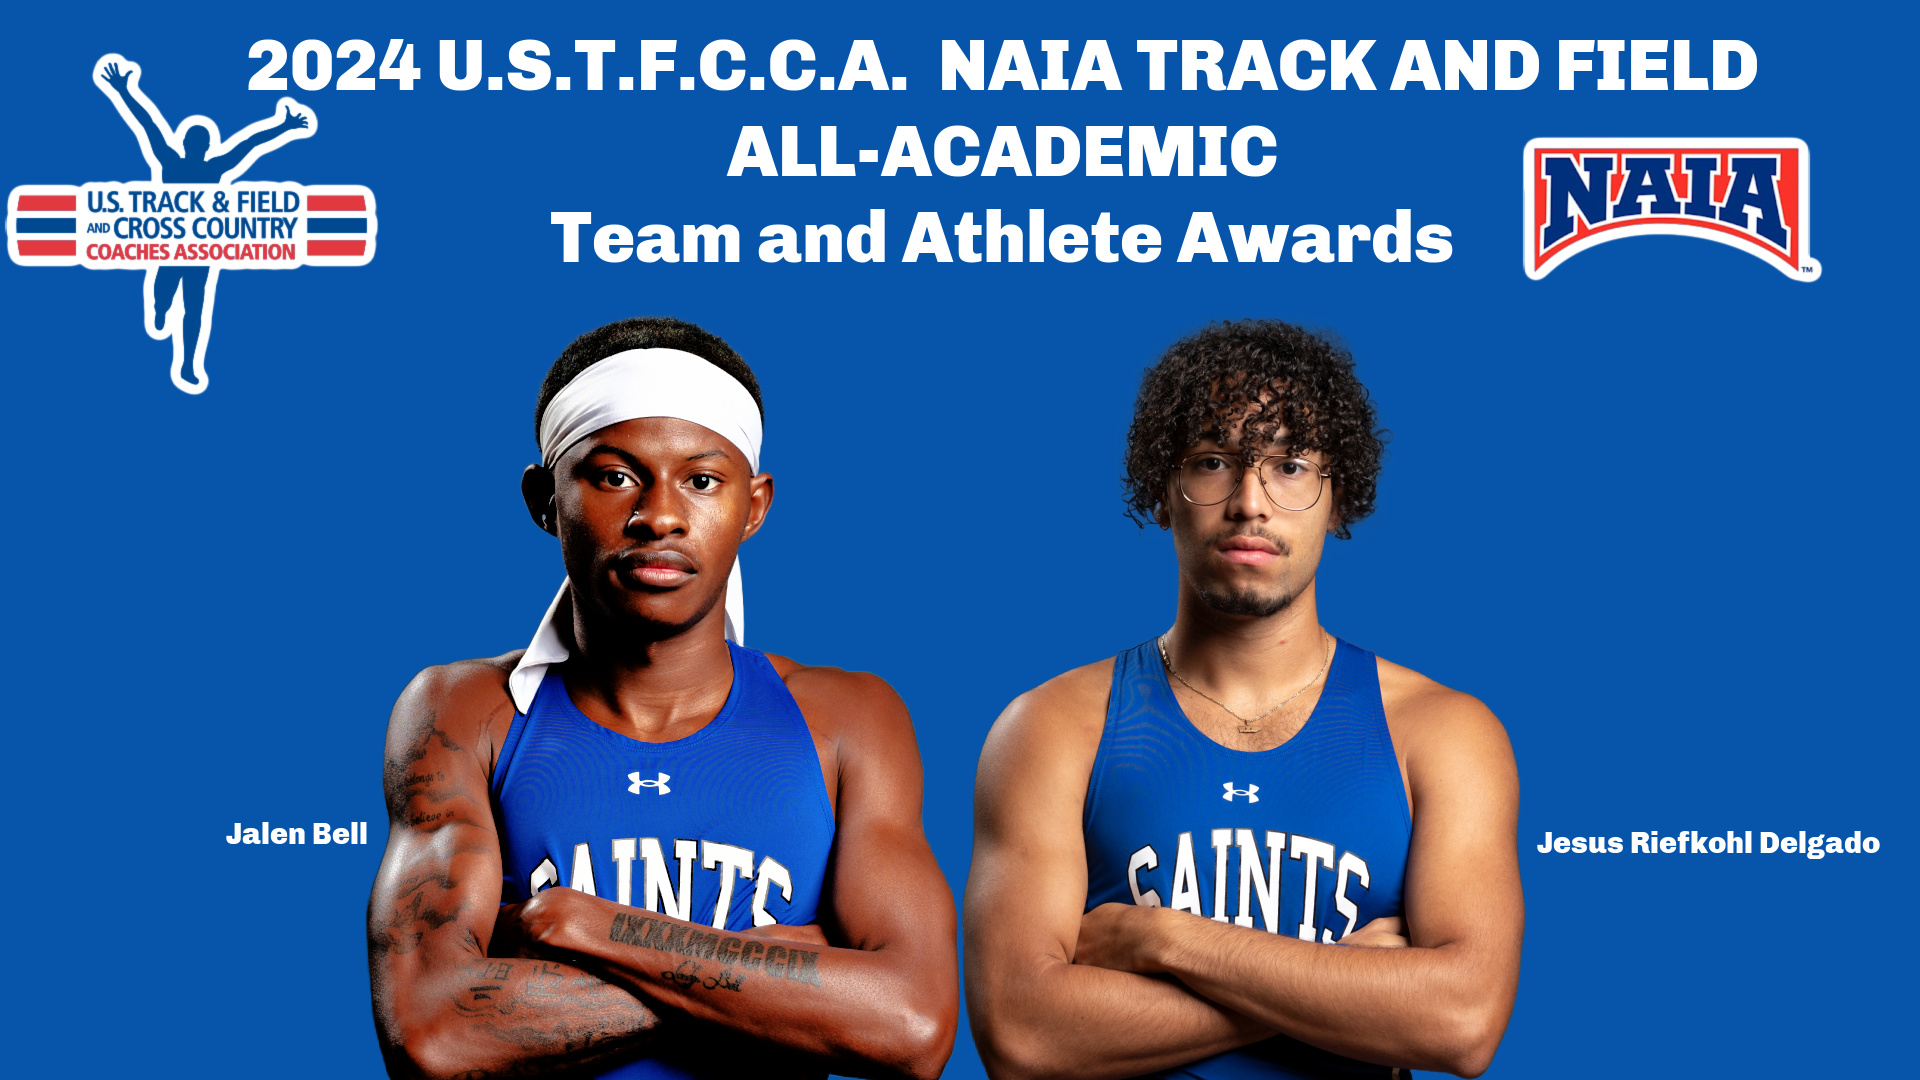 Men's Track and Field Team Plus Two Individuals Receive All-Academic Honors